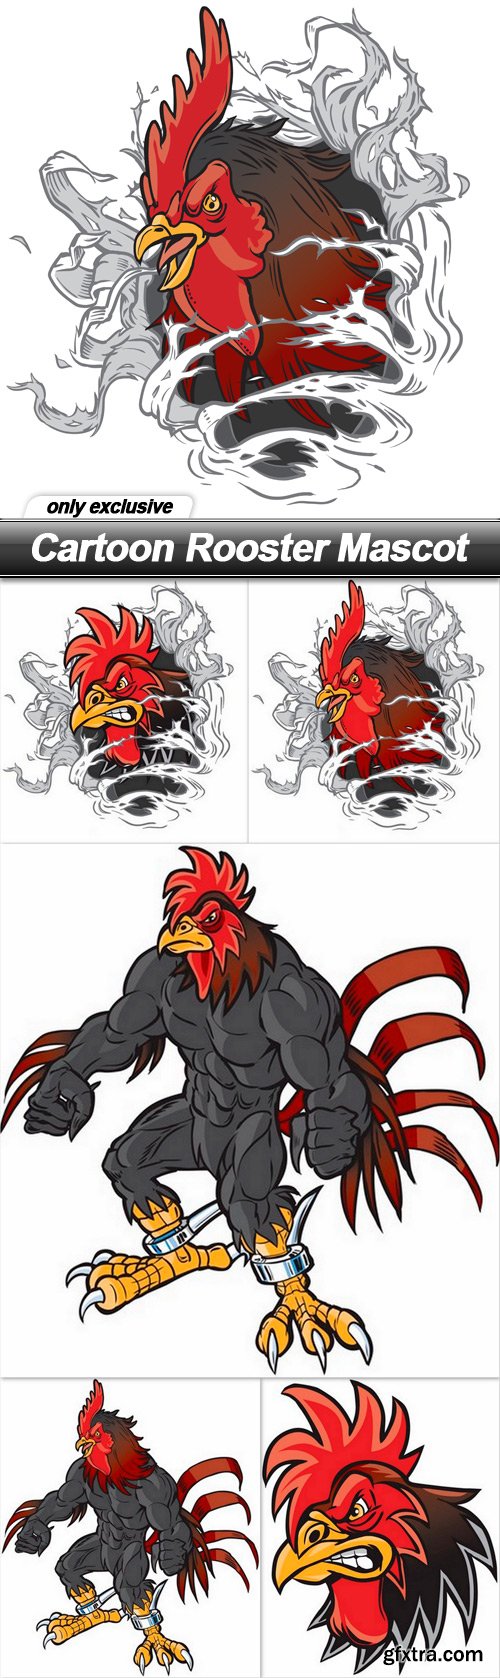 Cartoon Rooster Mascot - 5 EPS